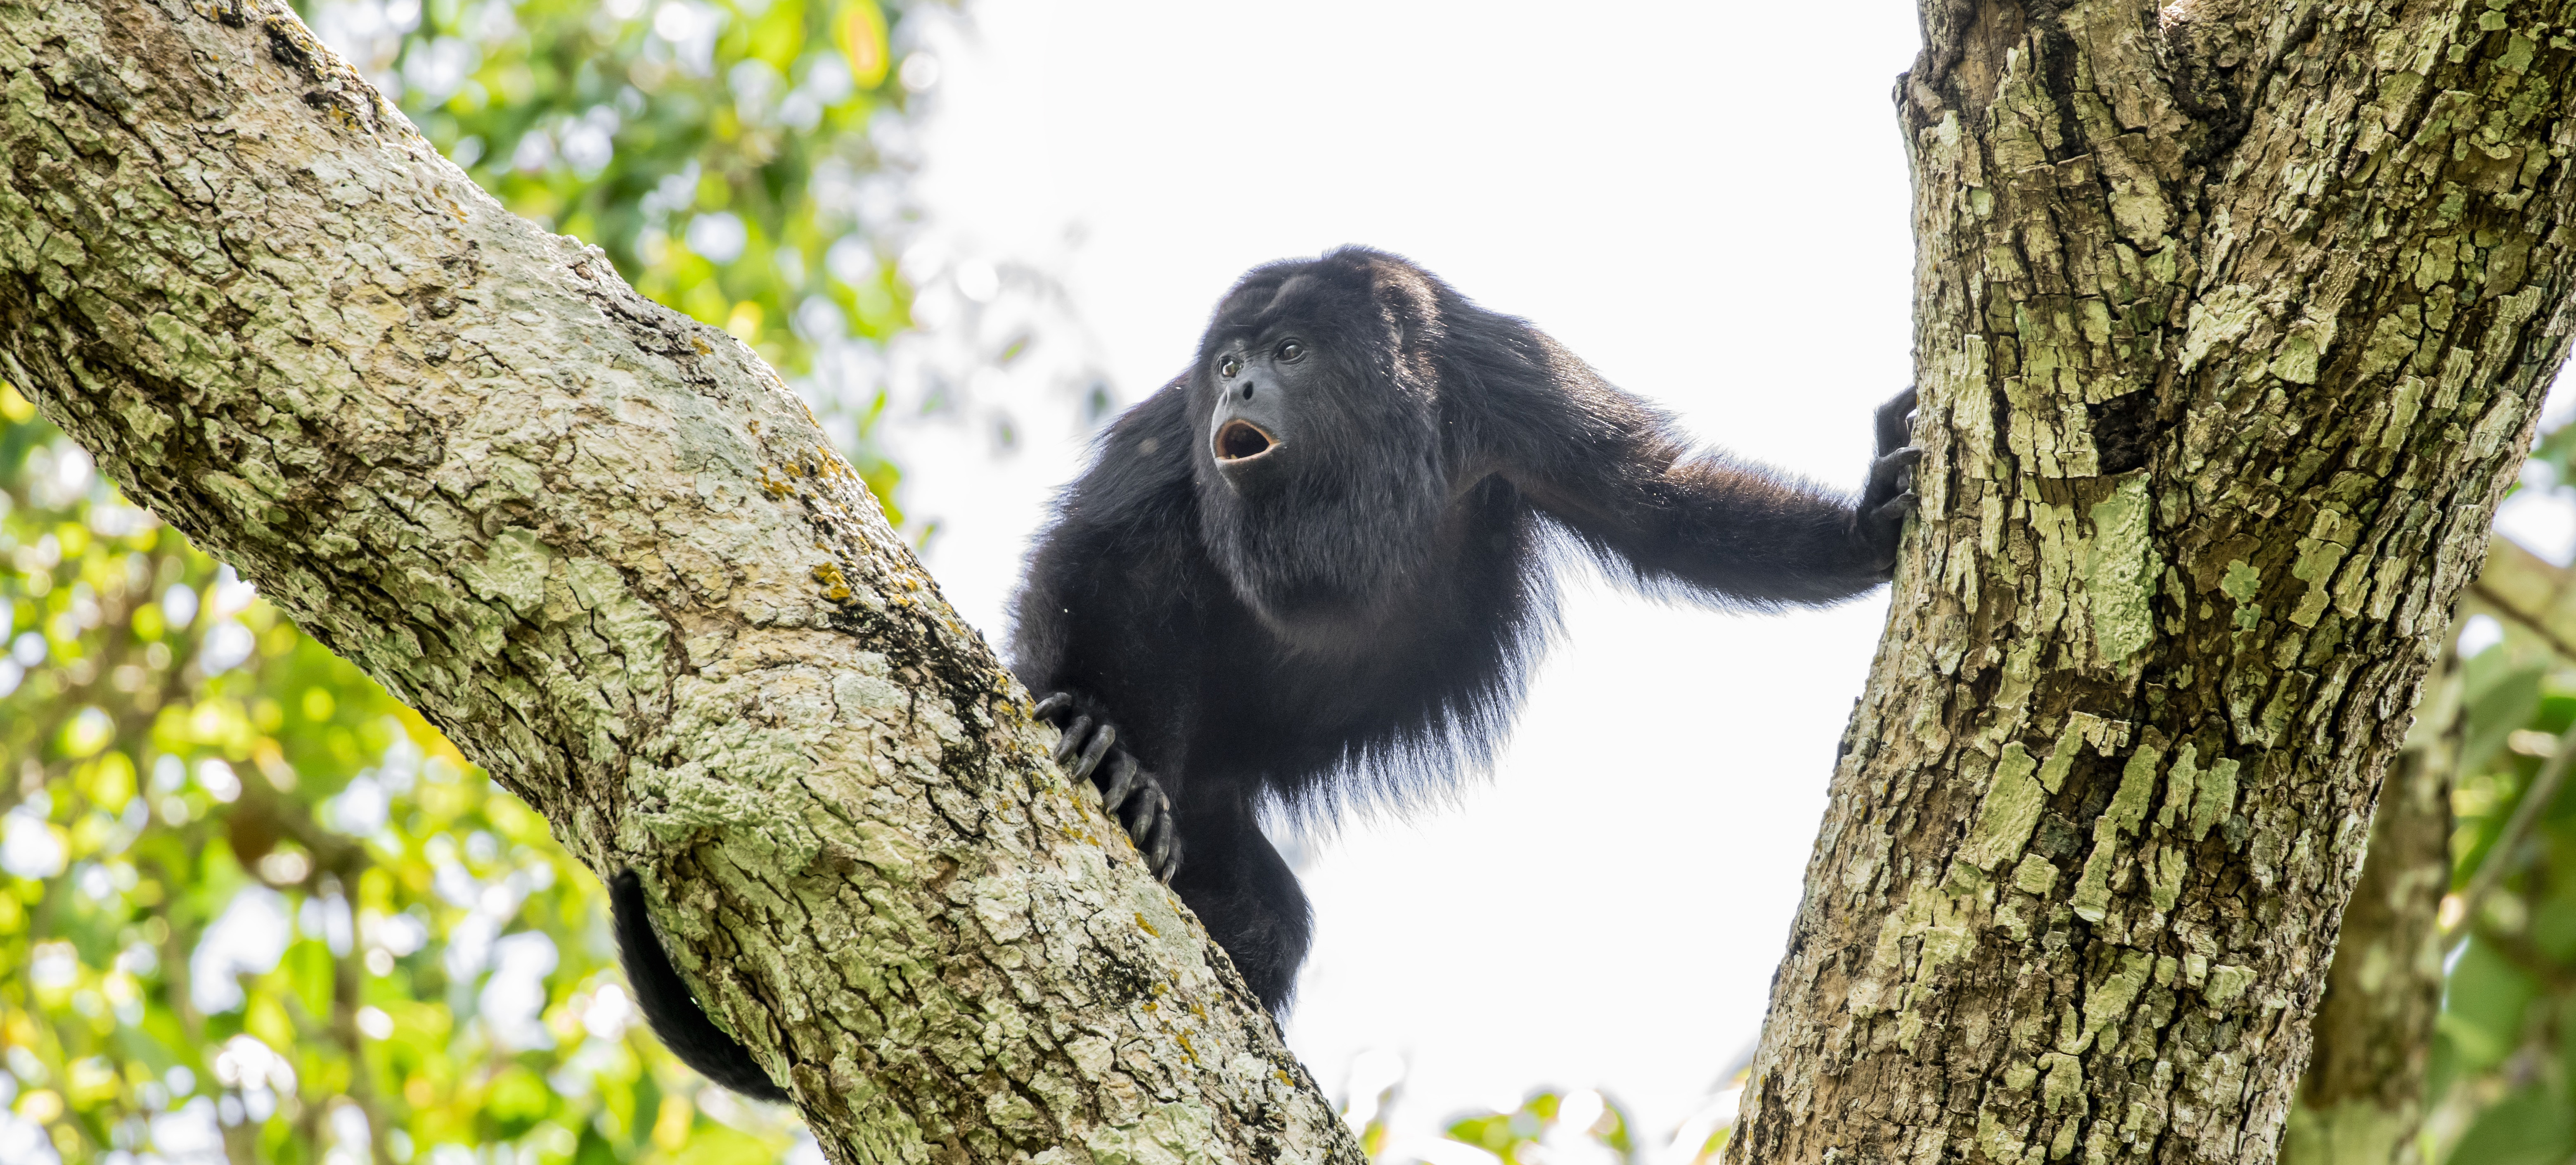 black howler monkey with open mouth perched between tree branches